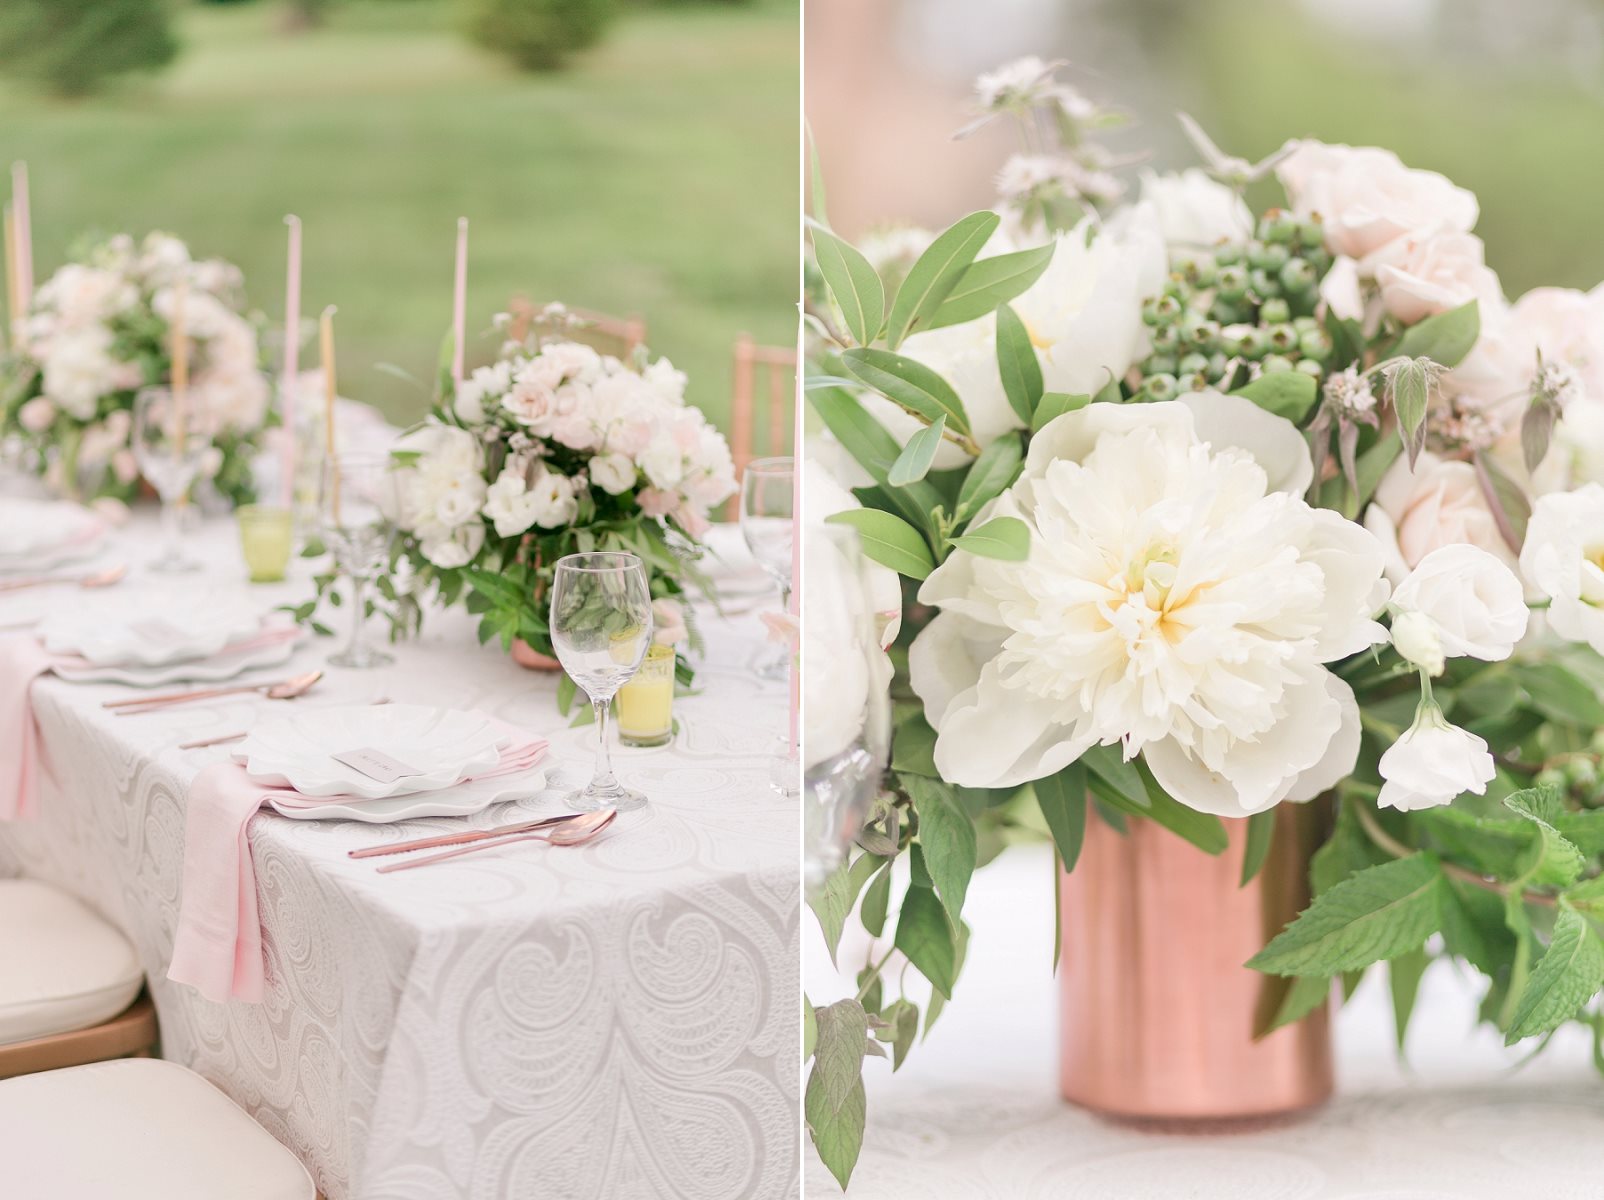 Spring Wedding Tablescape - Pretty Spring Wedding Ideas in Soft Pastels and Rose Gold